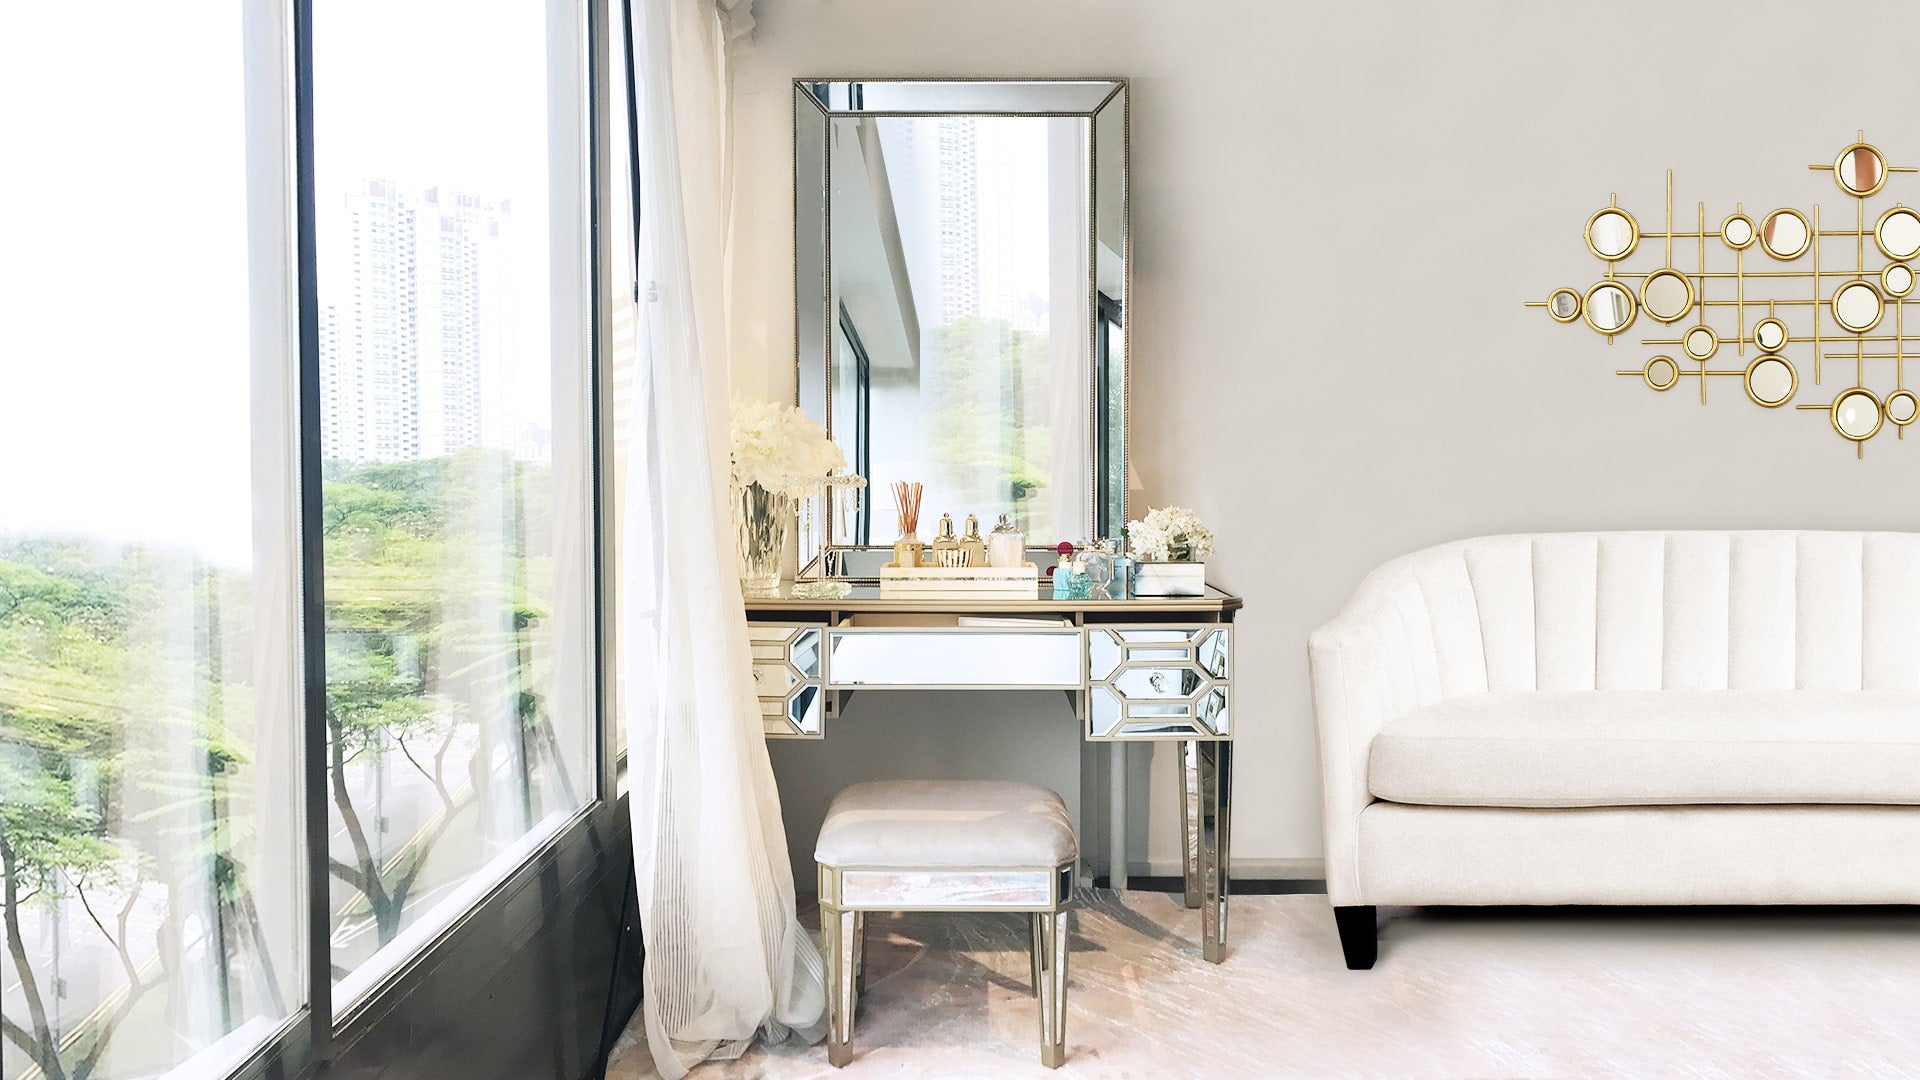 TIMELESS MIRRORED VANITY SETS